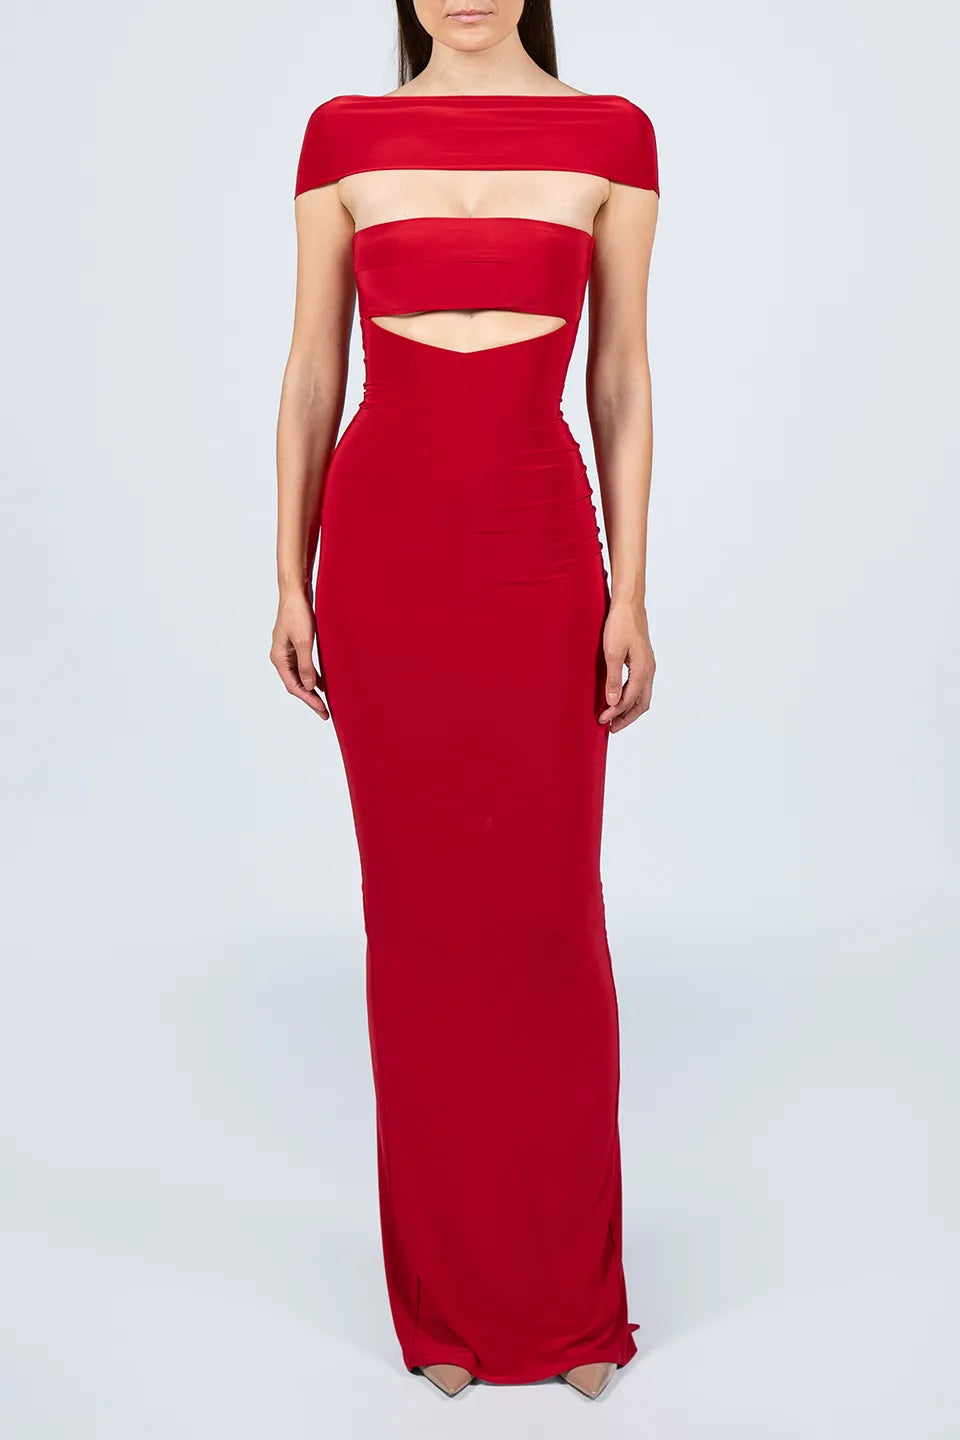 Shop online trendy Red Maxi dresses from Hamel Fashion designer. Product gallery 1